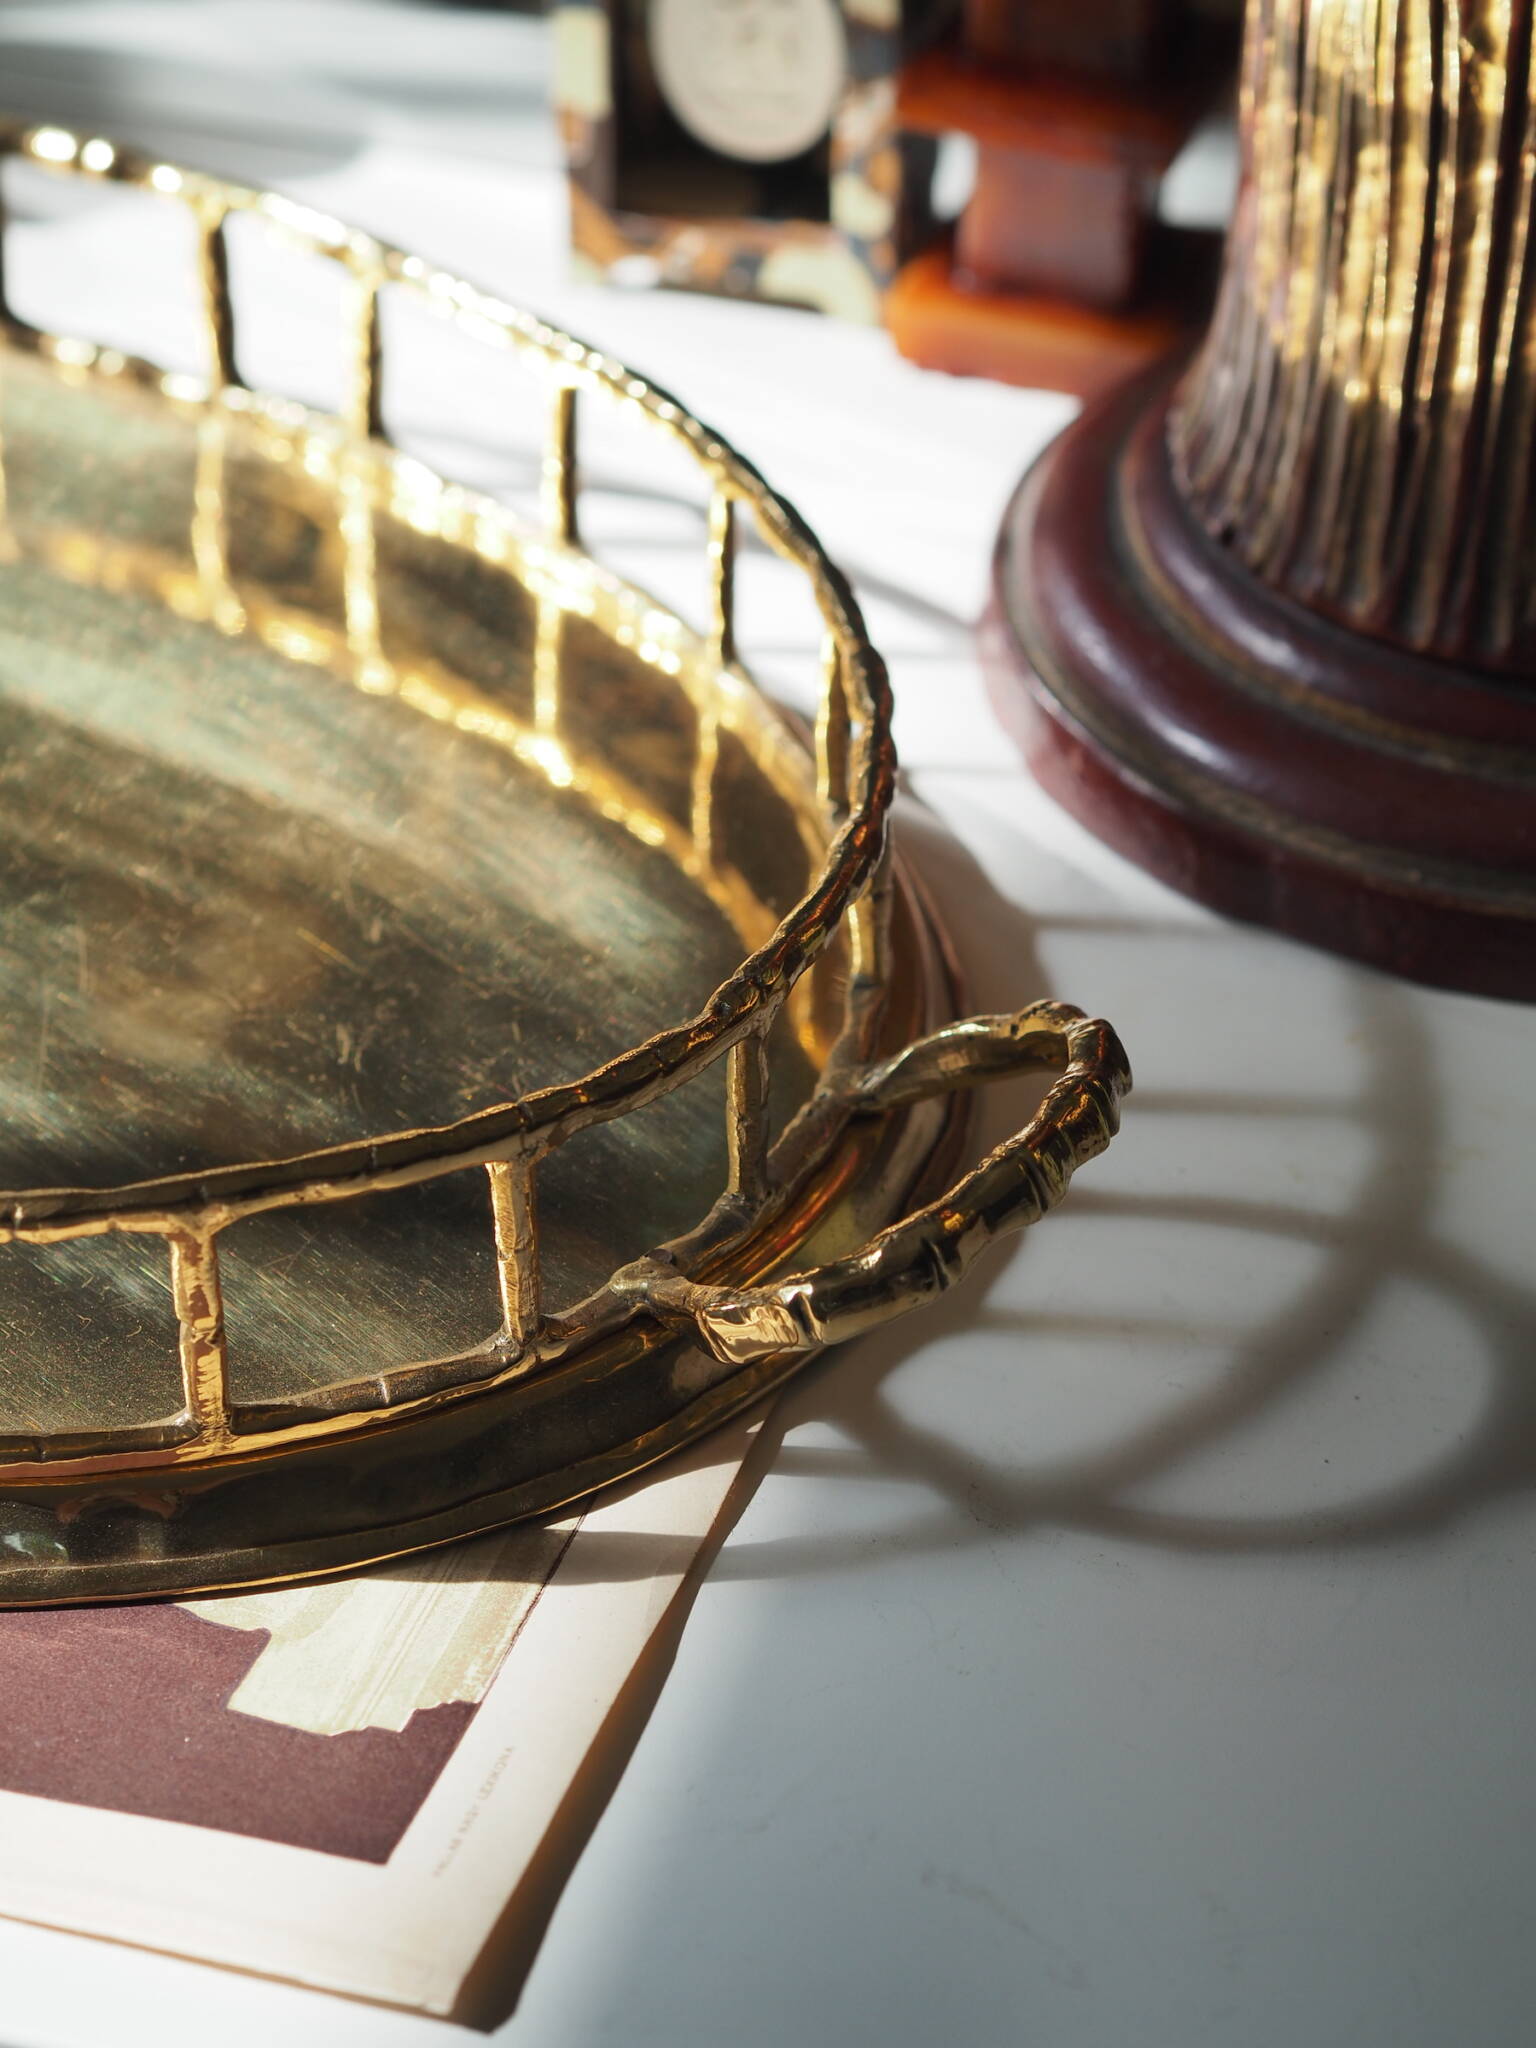 Vintage Oval Faux Bamboo Rim Brass Tray